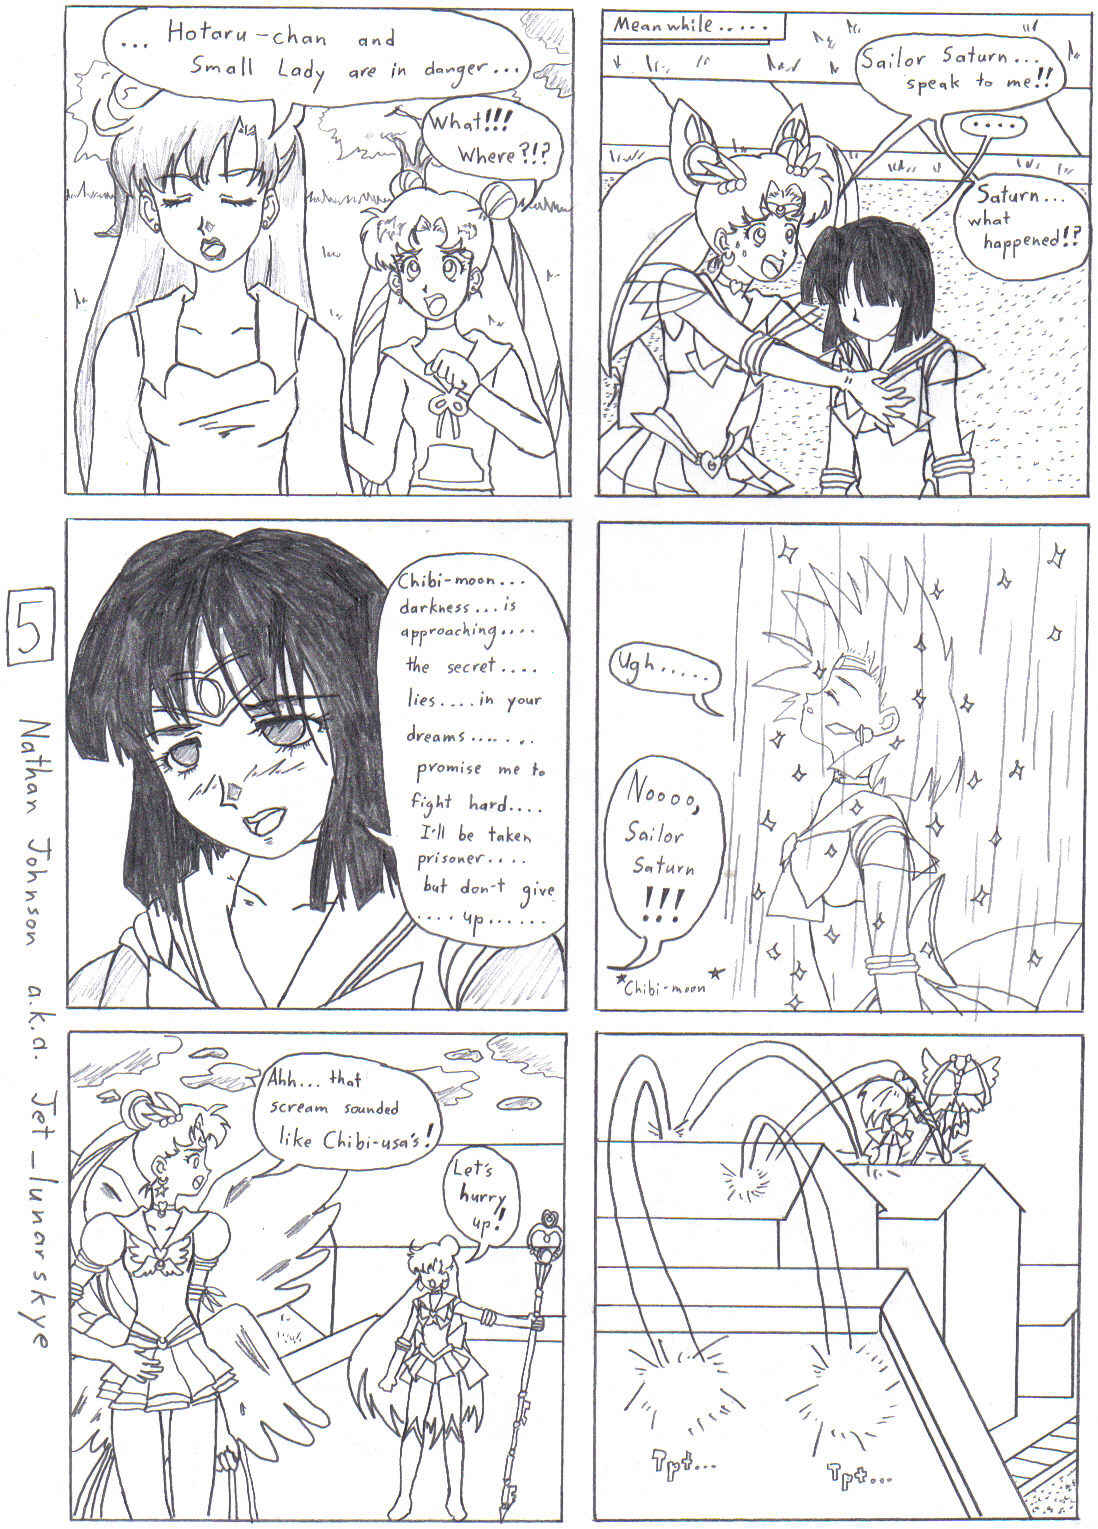 Sailor Moon Stars: The Nightmare Soldier page 5 by Jet_lunarskye